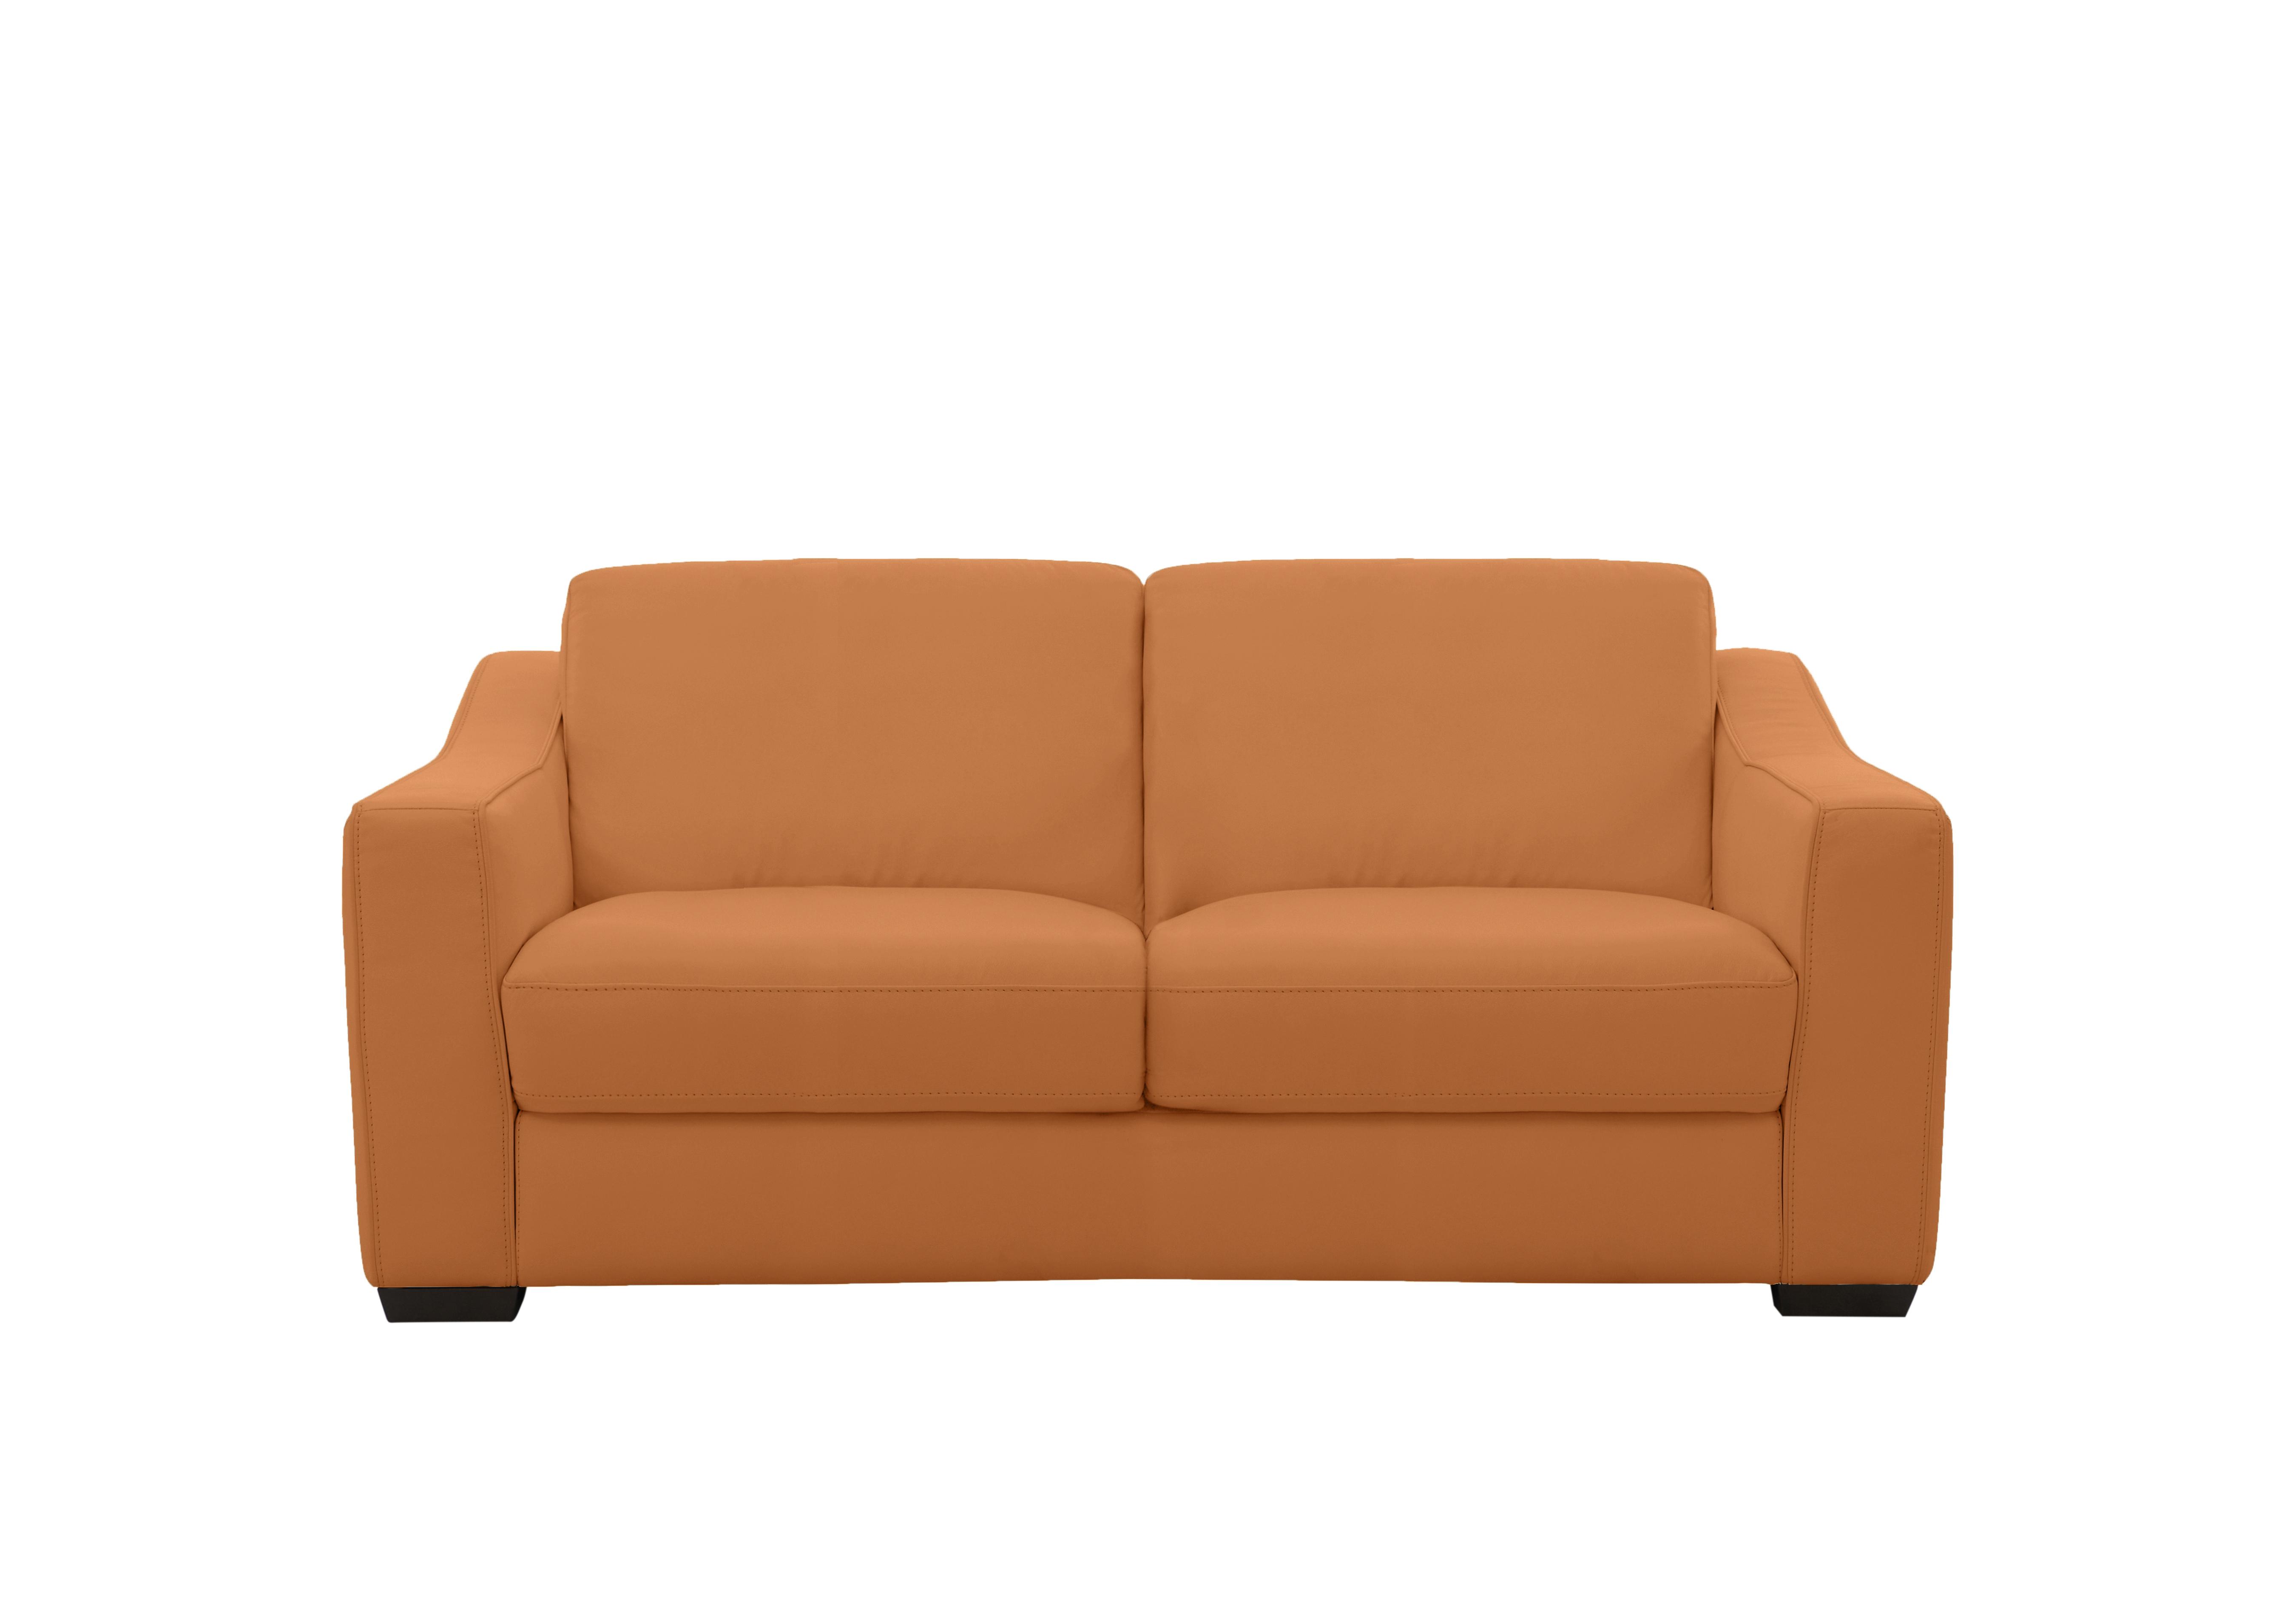 Optimus 2 Seater Leather Sofa in Bv-335e Honey Yellow on Furniture Village